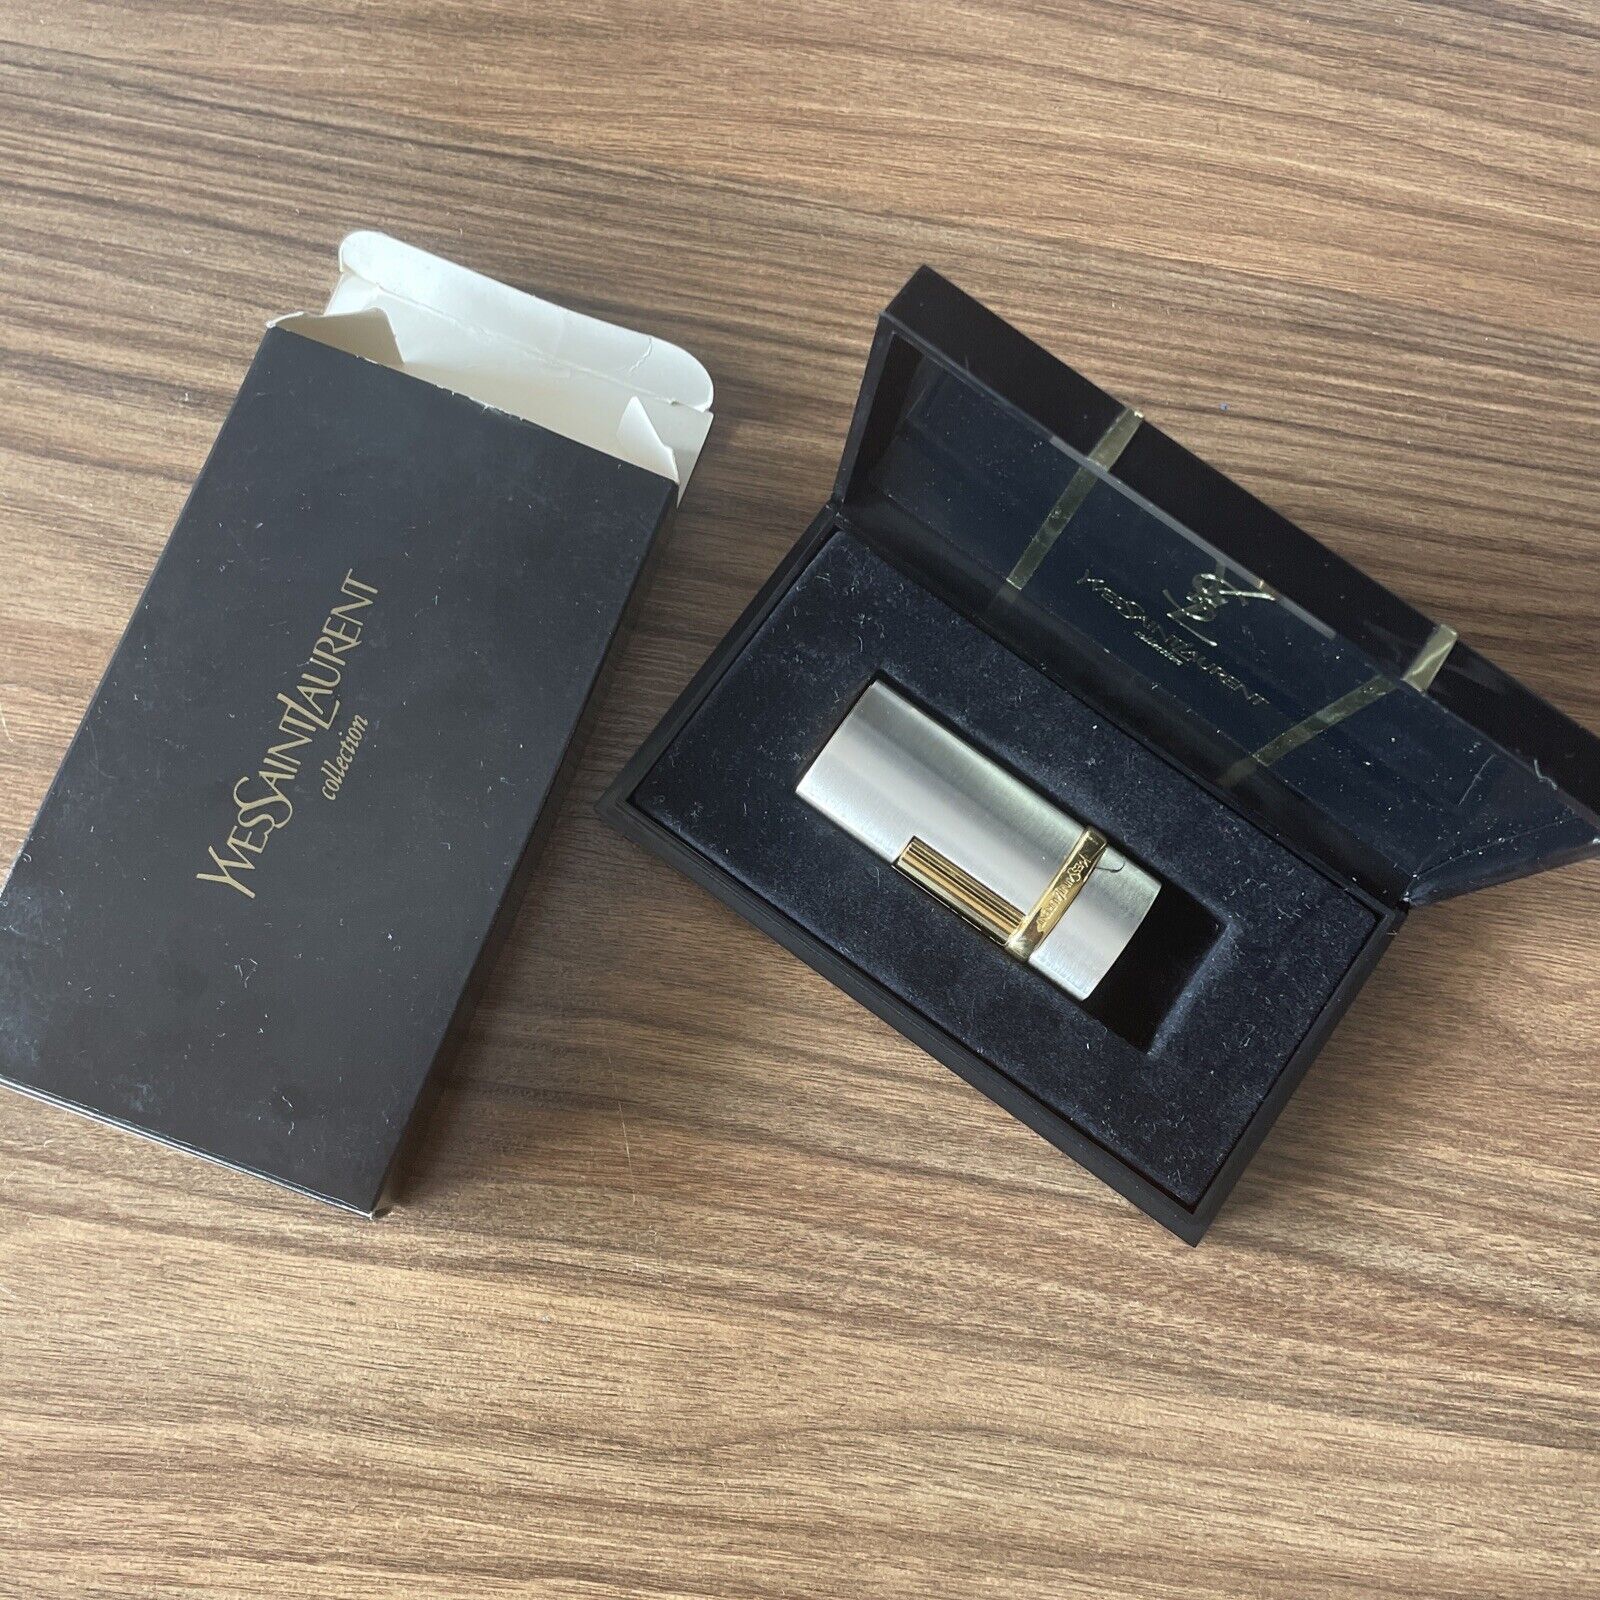 New Authentic Yves Saint Laurent Stainless Steel&Gold Plated Lighter